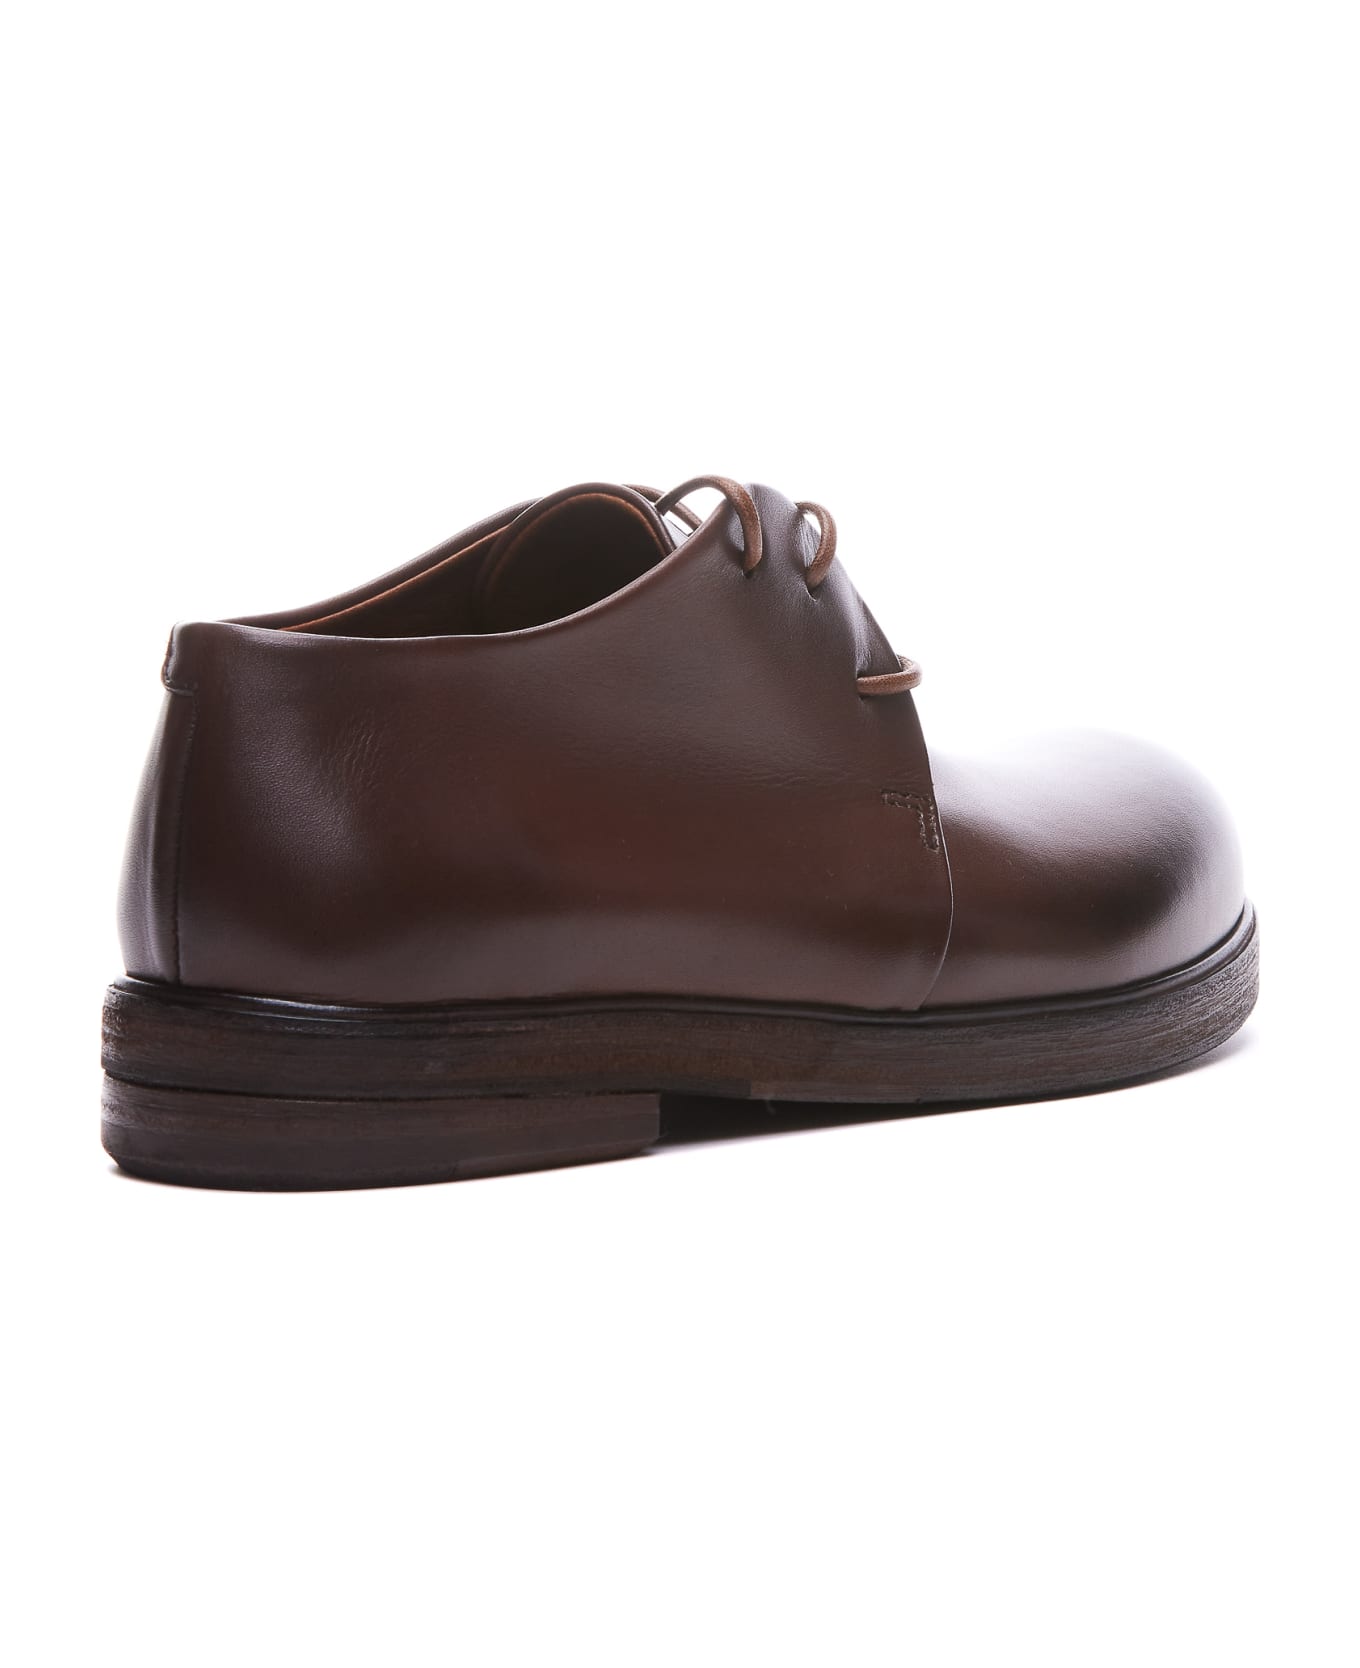 Marsell Zucca Derby Lace Up Shoes - Brown フラットシューズ